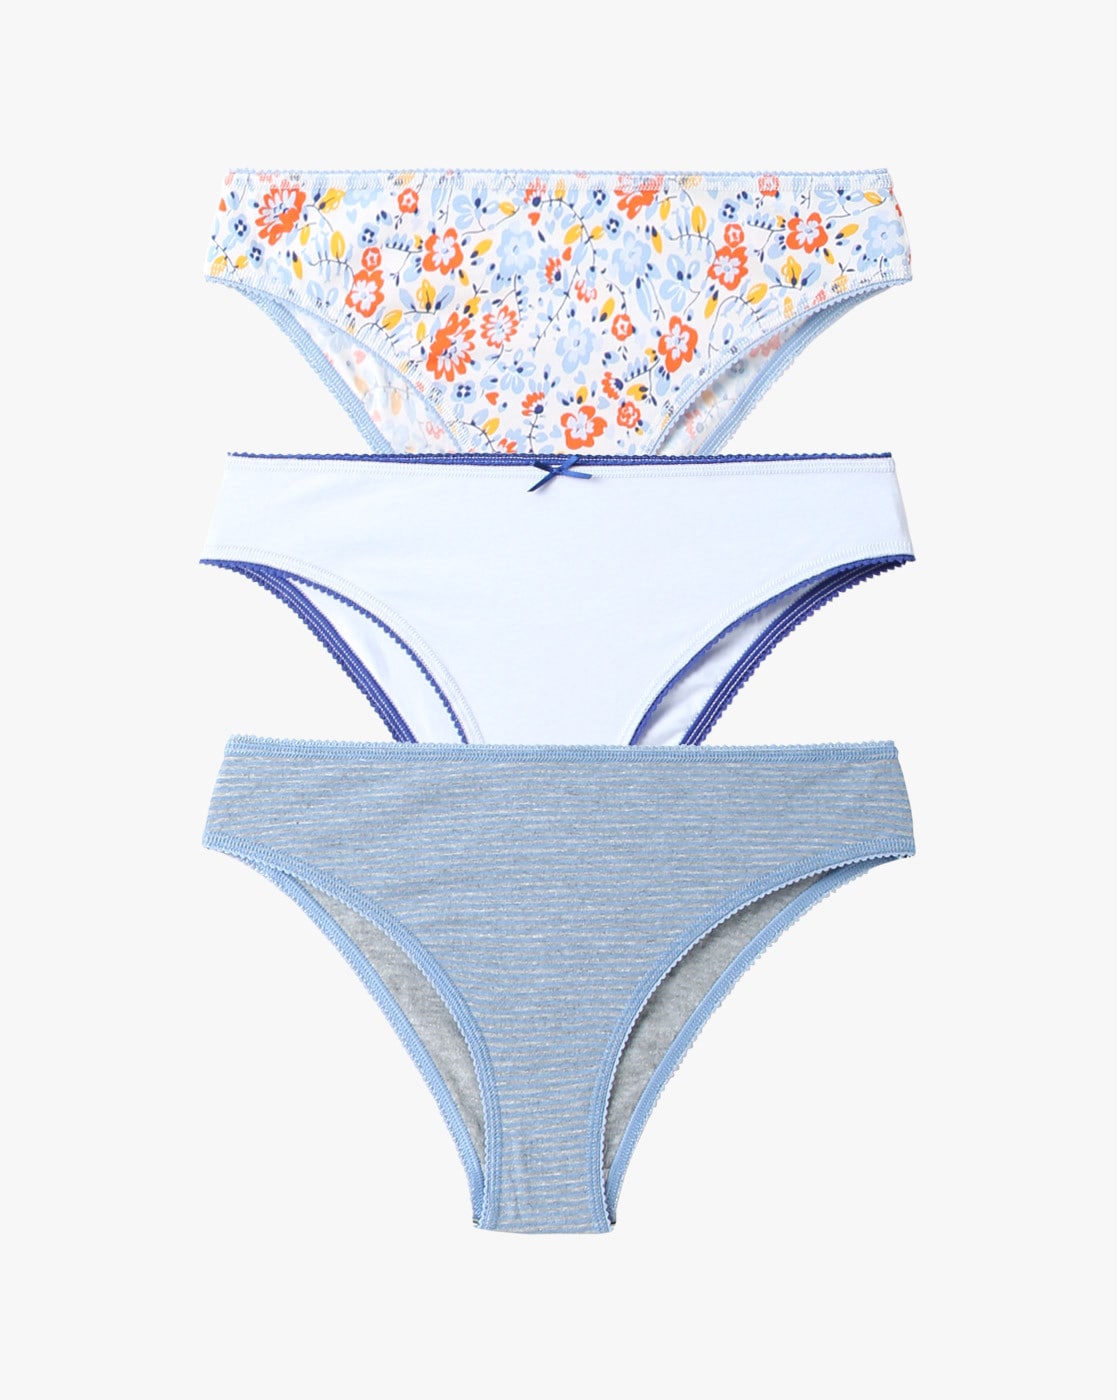 Buy Assorted Panties for Women by Marks & Spencer Online